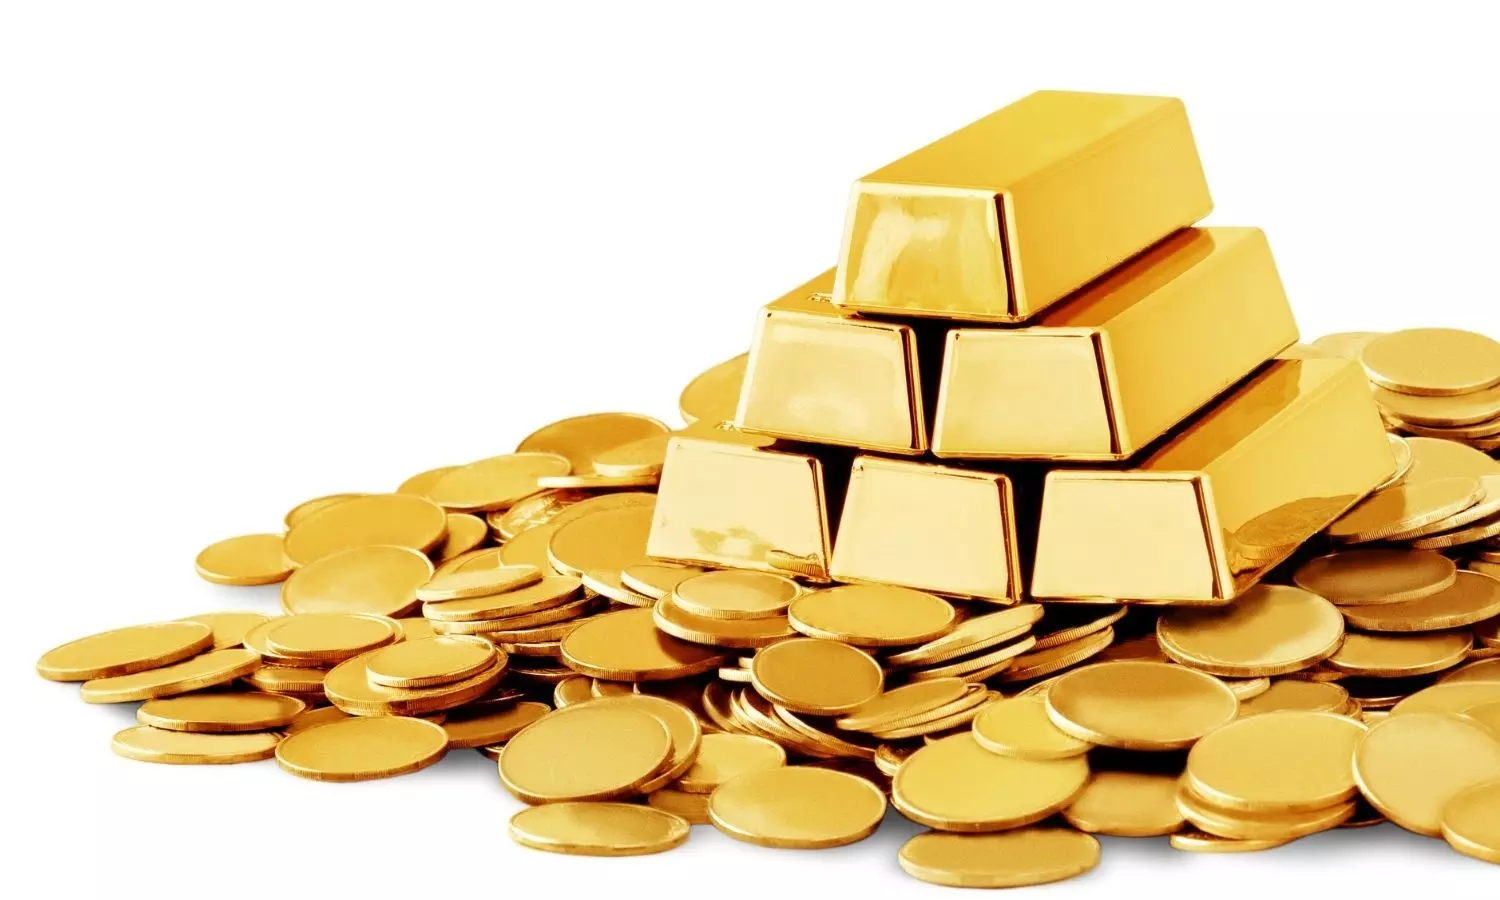 Gold bars in coins